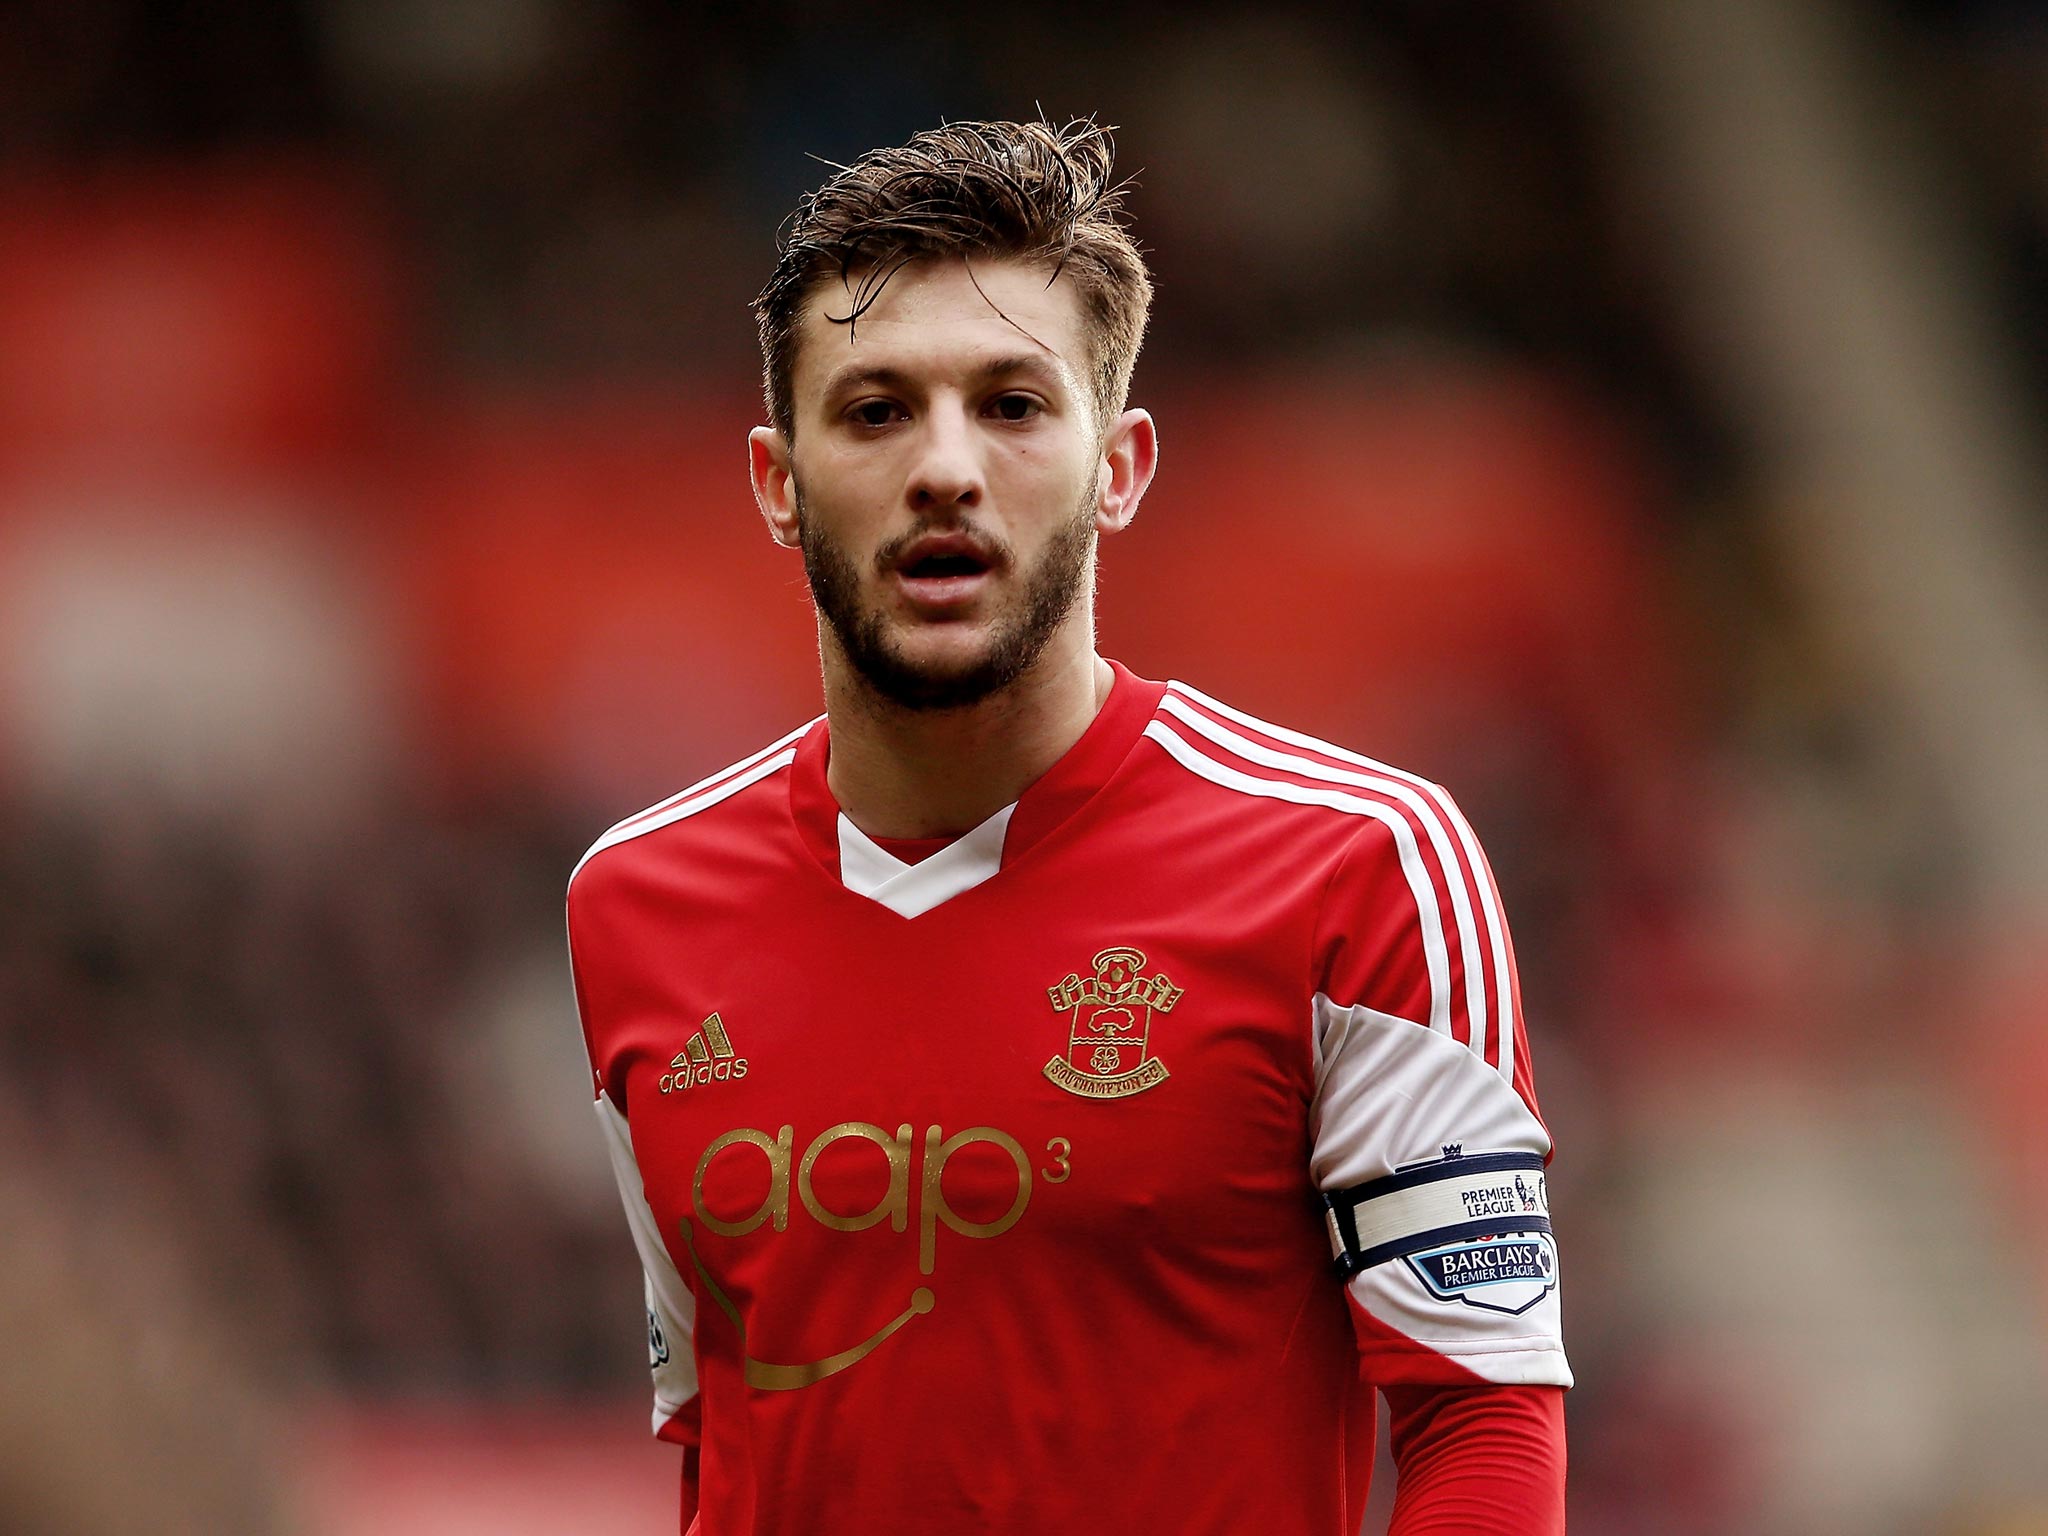 Southampton midfielder Adam Lallana is a reported £20m target for Liverpool